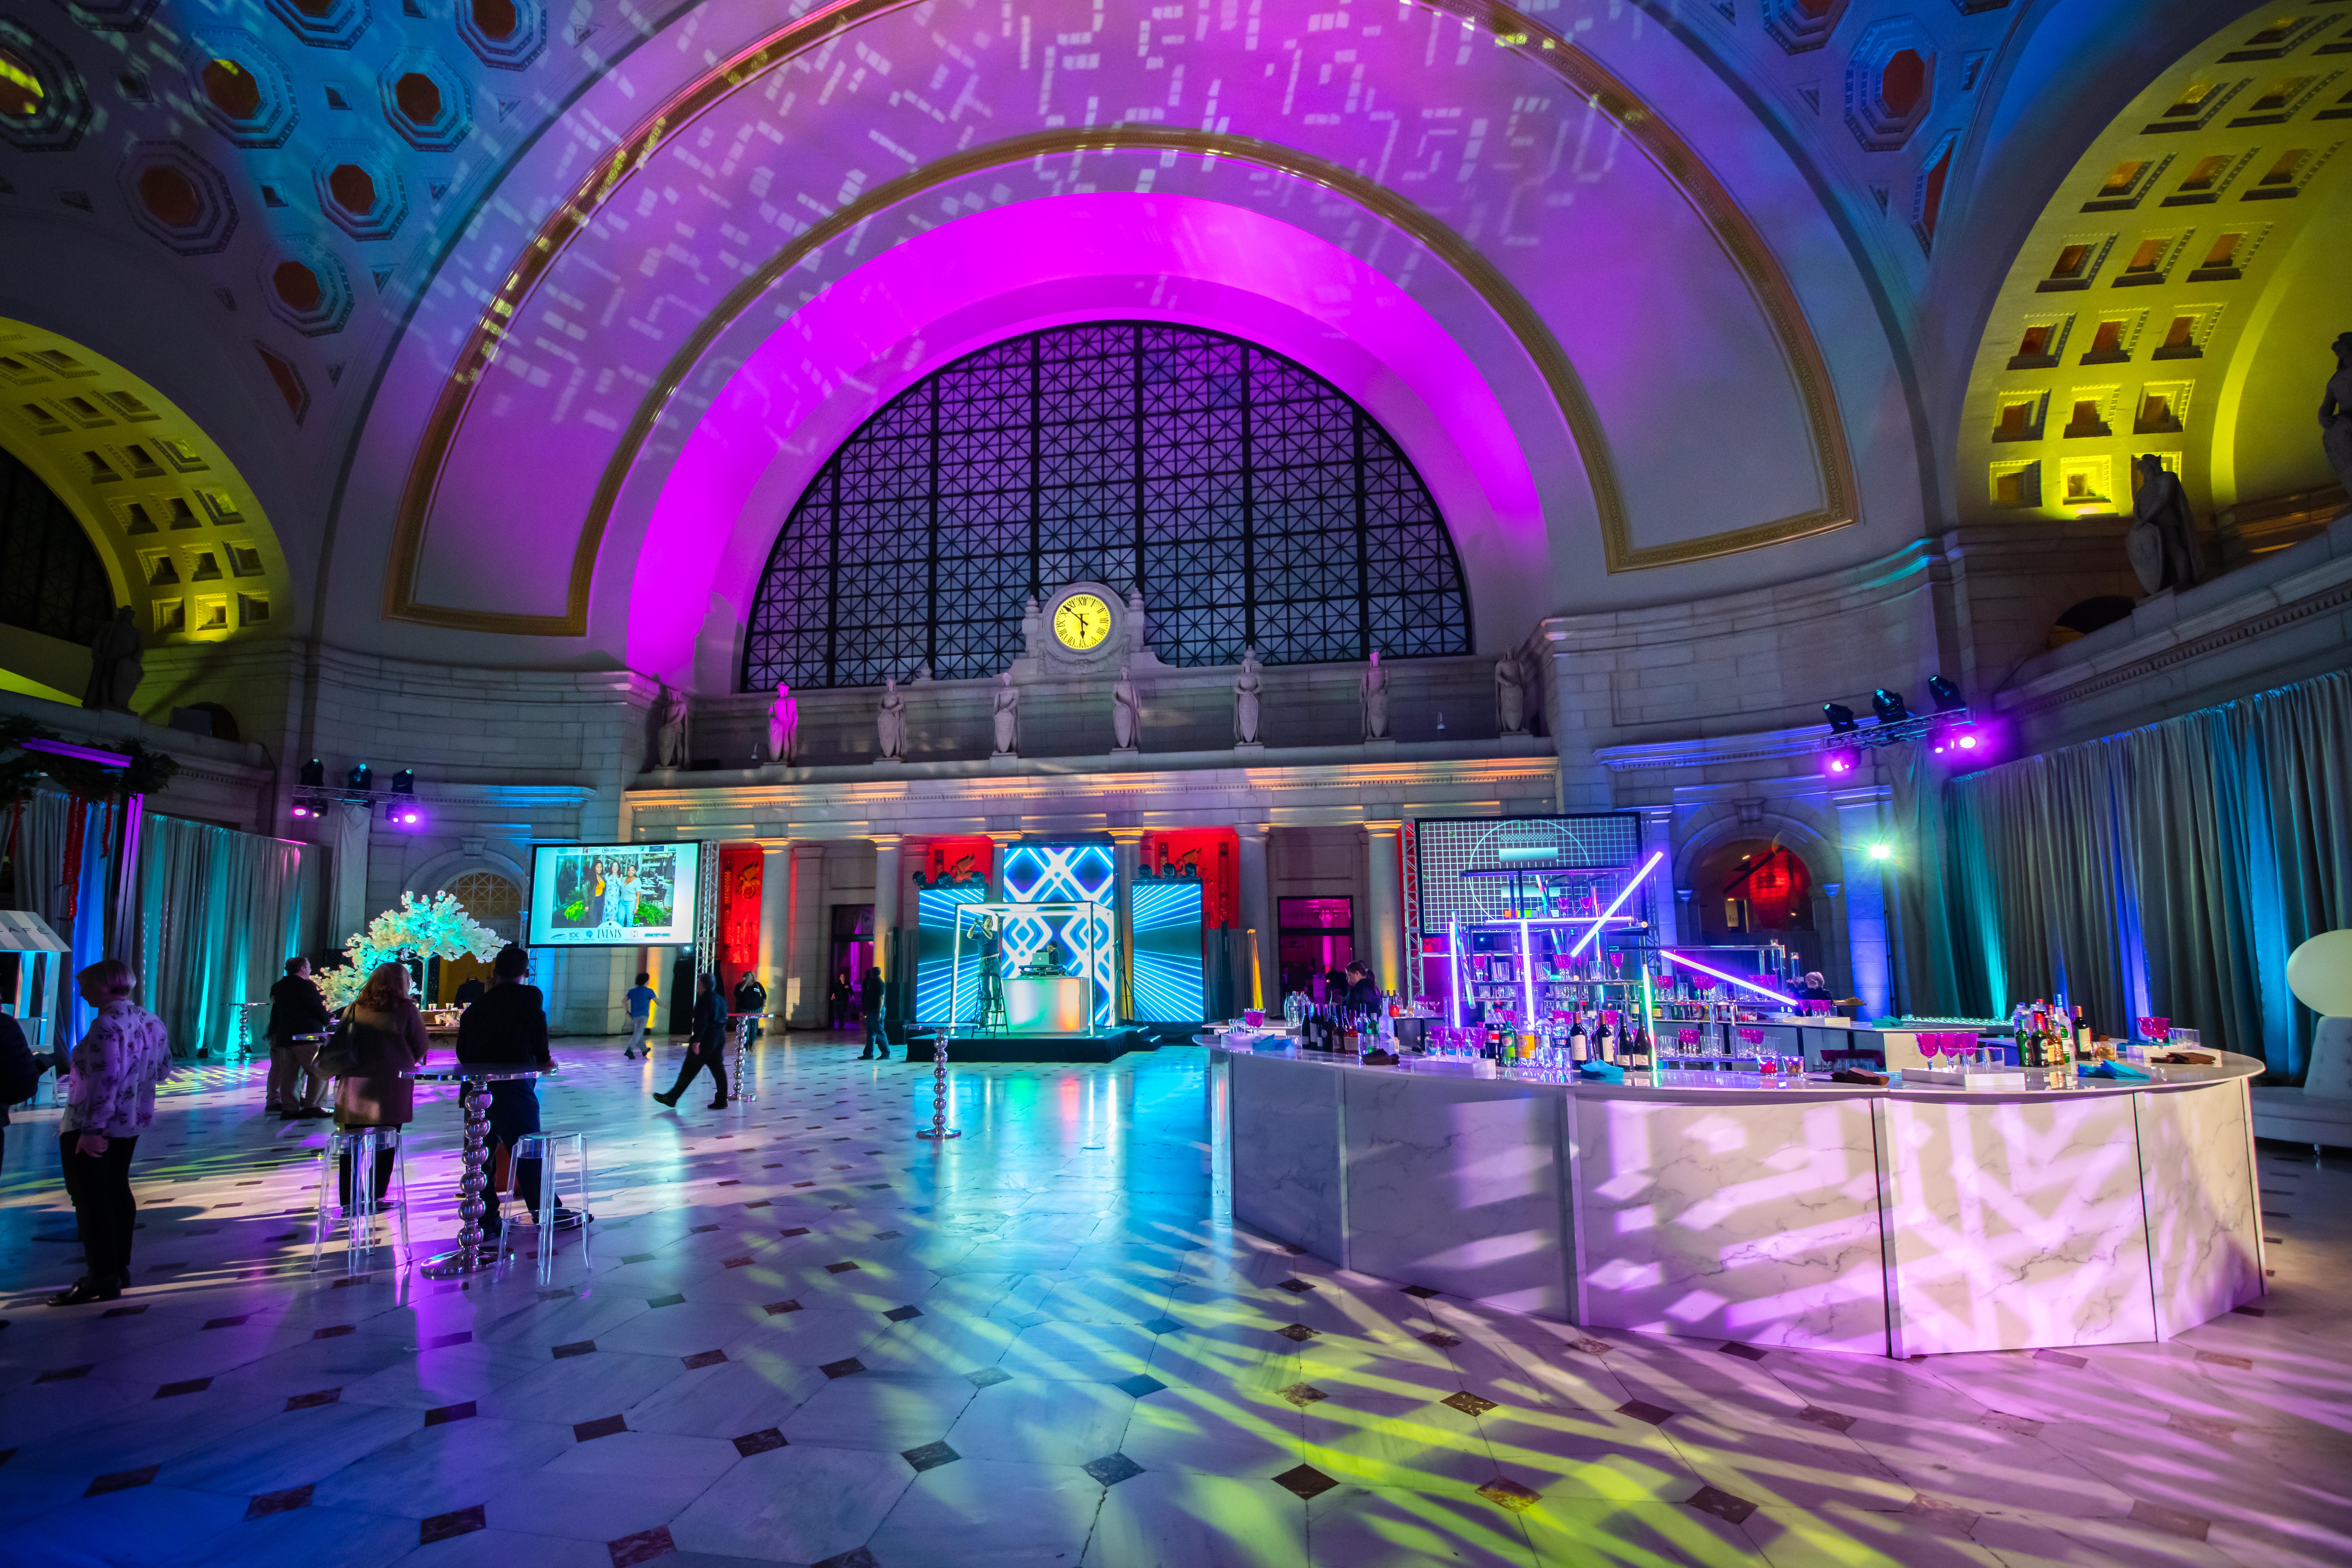 Corporate Event Cocktail Reception in Main Hall-East featuring a Stage, 360-Bar, Lounge Seating, and Neon Lights paired with Pink and Blue Up-Lighting.